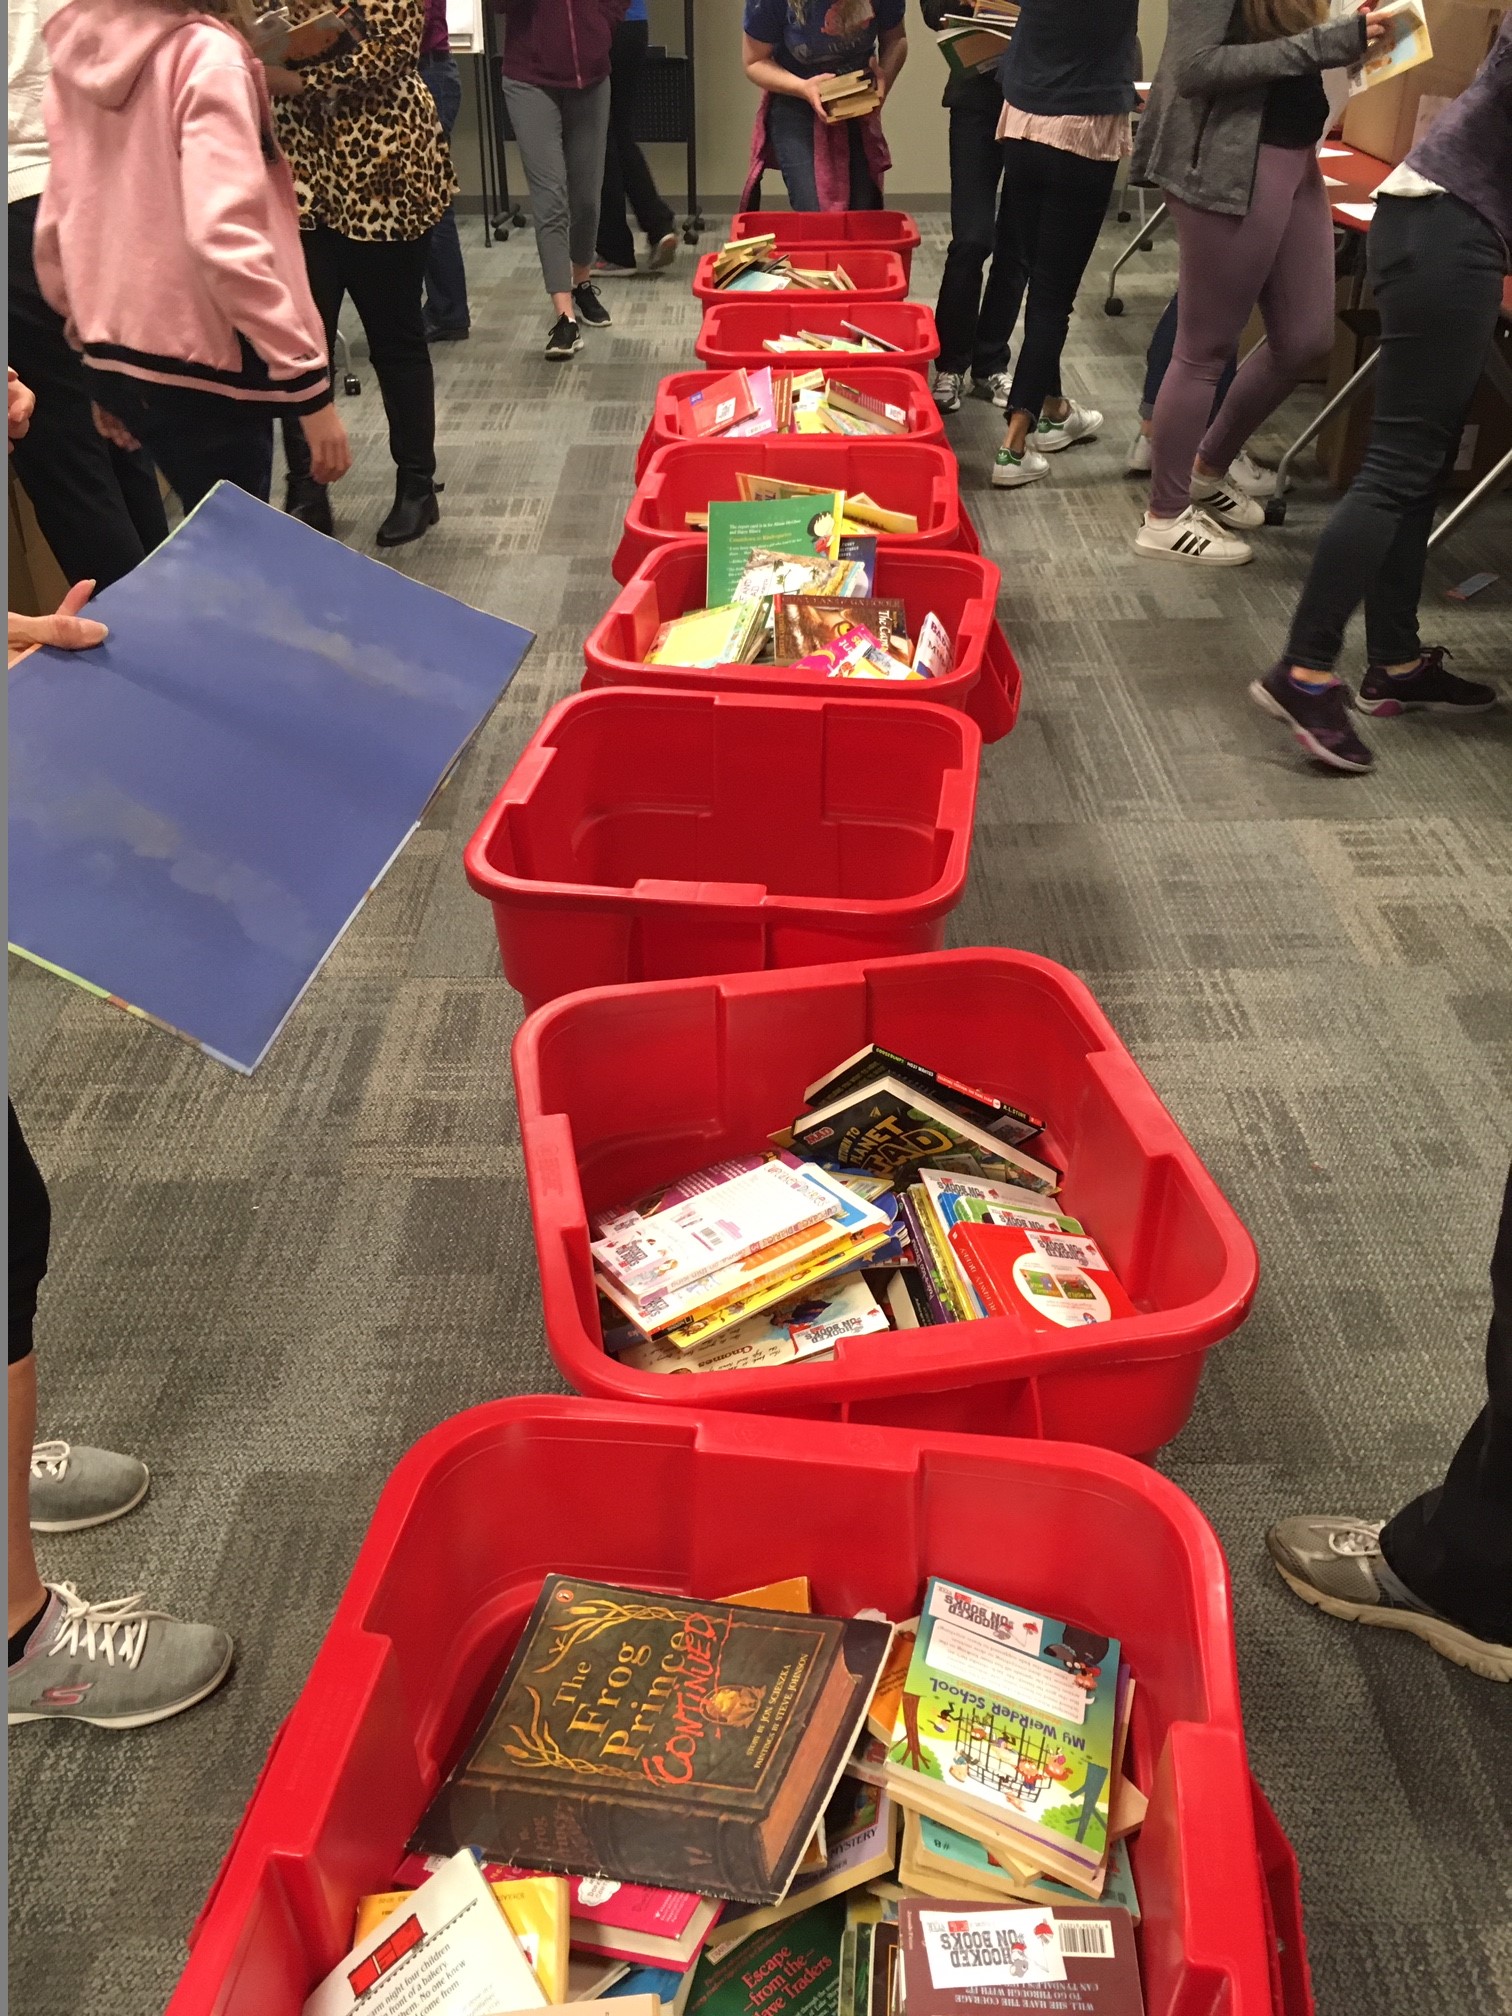 Hooked on Books by the Numbers: 13,000 Books, 16 schools, 50+ Volunteers!